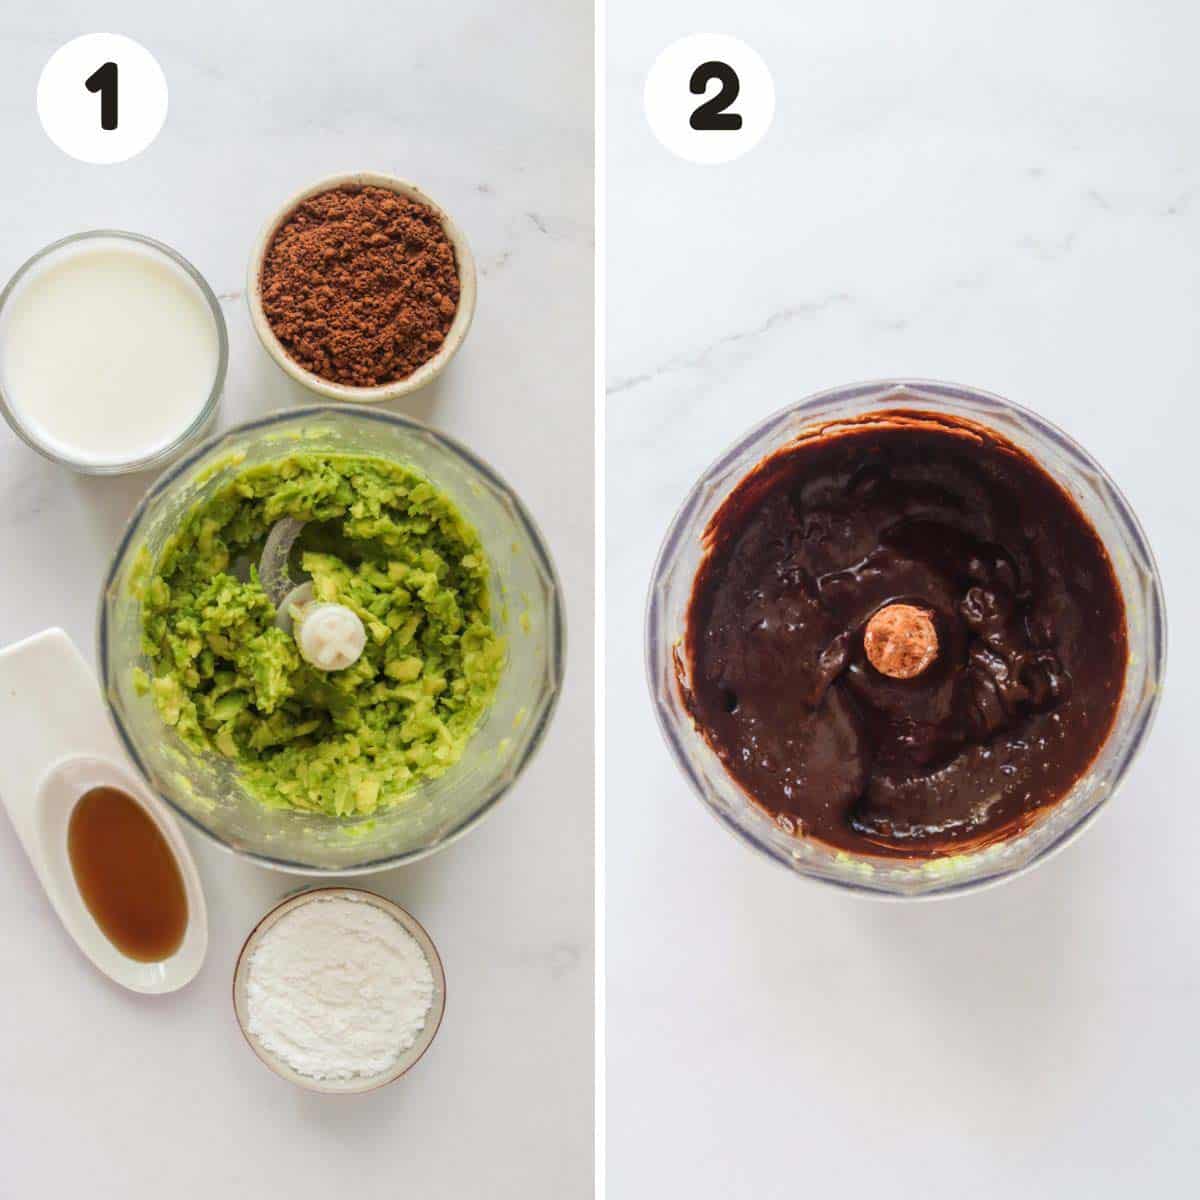 Steps to make the chocolate mousse.